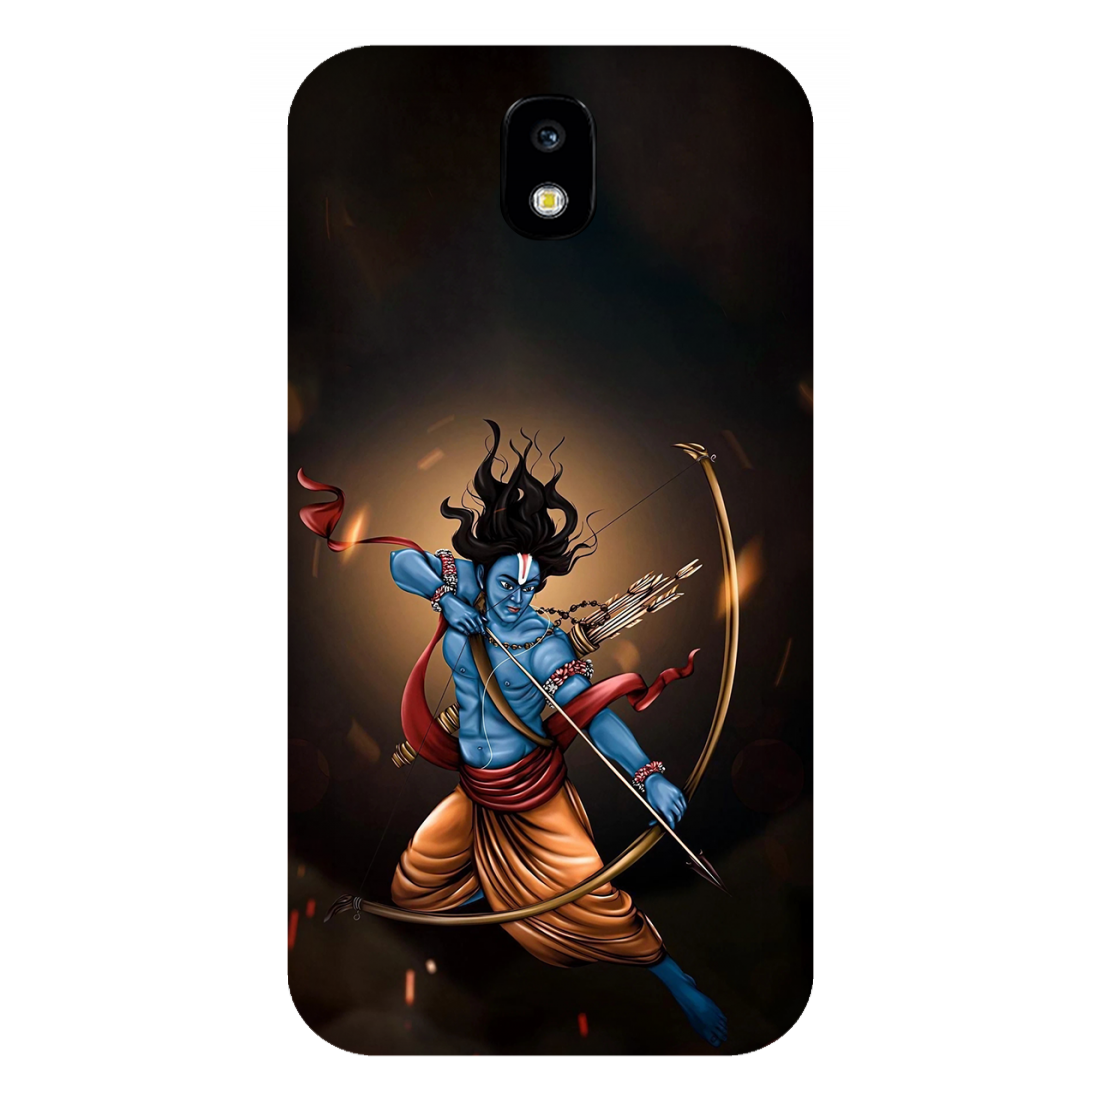 Warrior with Bow in Mystical Light Case Samsung Galaxy J7 Pro